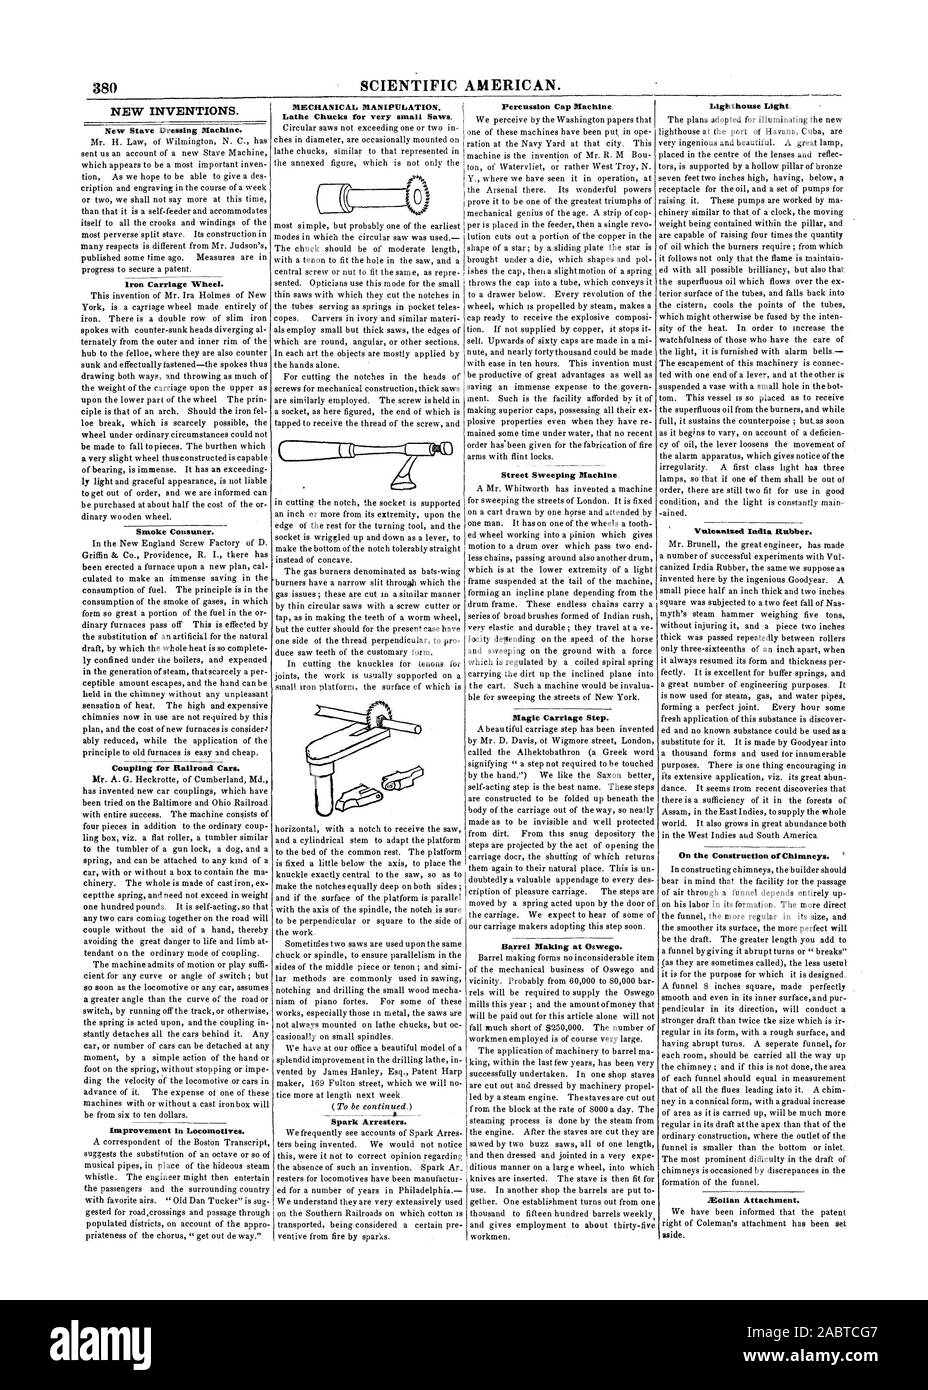 380 SCIENTIFIC AMERICAN. NEW INVENTIONS. New Stave Dressing Machine. Iron Carriage Wheel. Smoke Consuner. Improvement in Locomotives. MECHANICAL MANIPULATION. Lathe Chucks for very small Saws. Spark Arresters. Percussion Cap Machine Street Sweeping Machine Magic Carriage Step. Barrel Making at Oswego. Lighthouse Light Vulcanized India Rubber. On the Construction of Chimneys. 'Bohan Attachment., 1847-08-21 Stock Photo